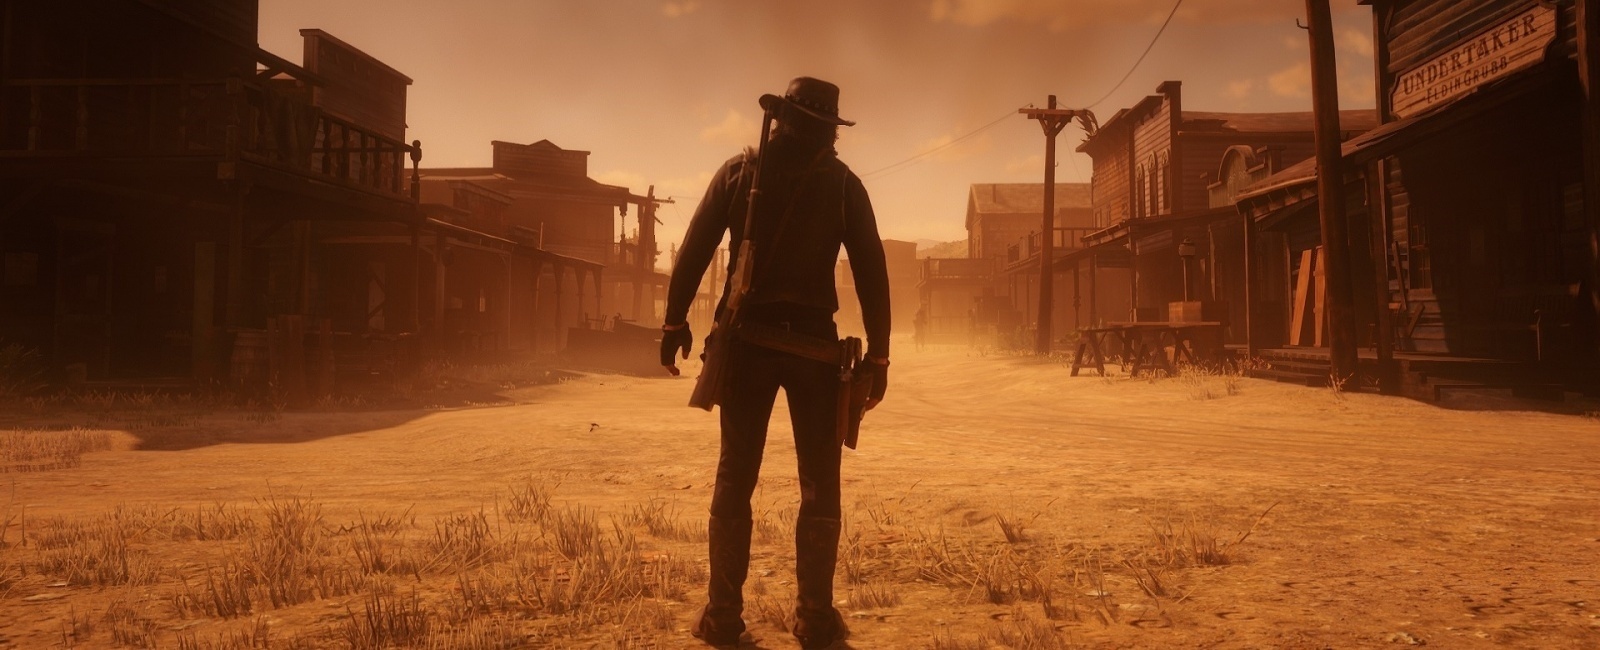 Red Dead Redemption 2 Wallpapers - Top 25 Best Red Dead Redemption